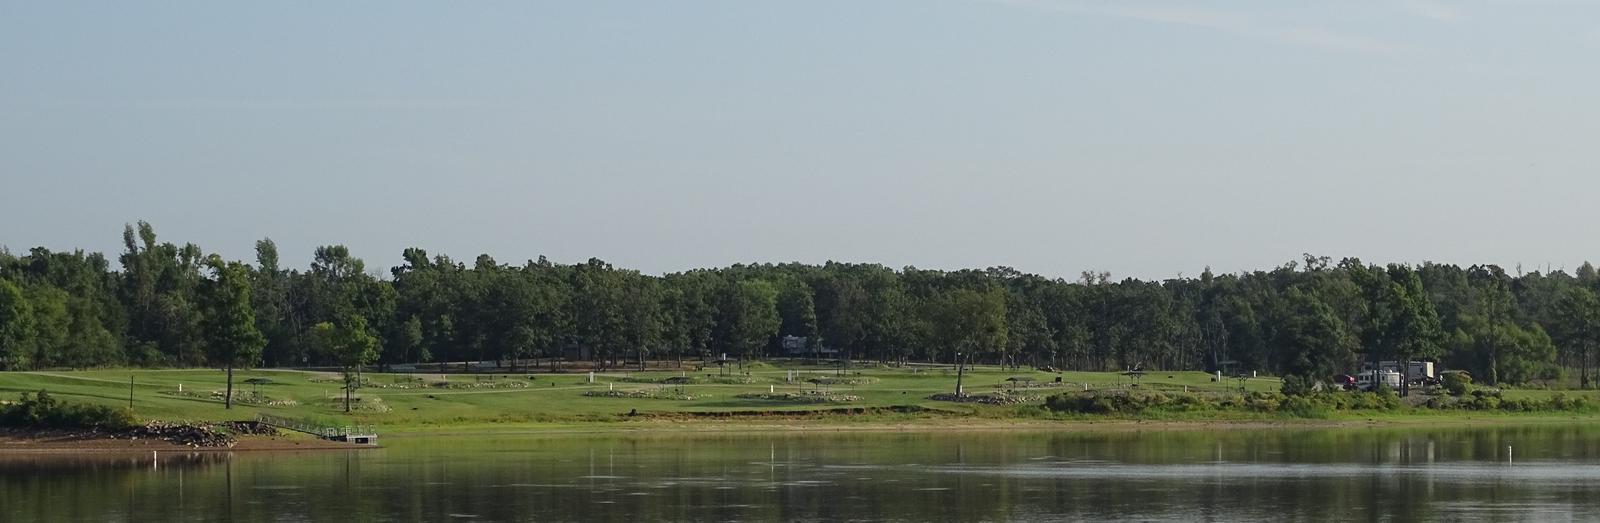 Virgil Point from the lake